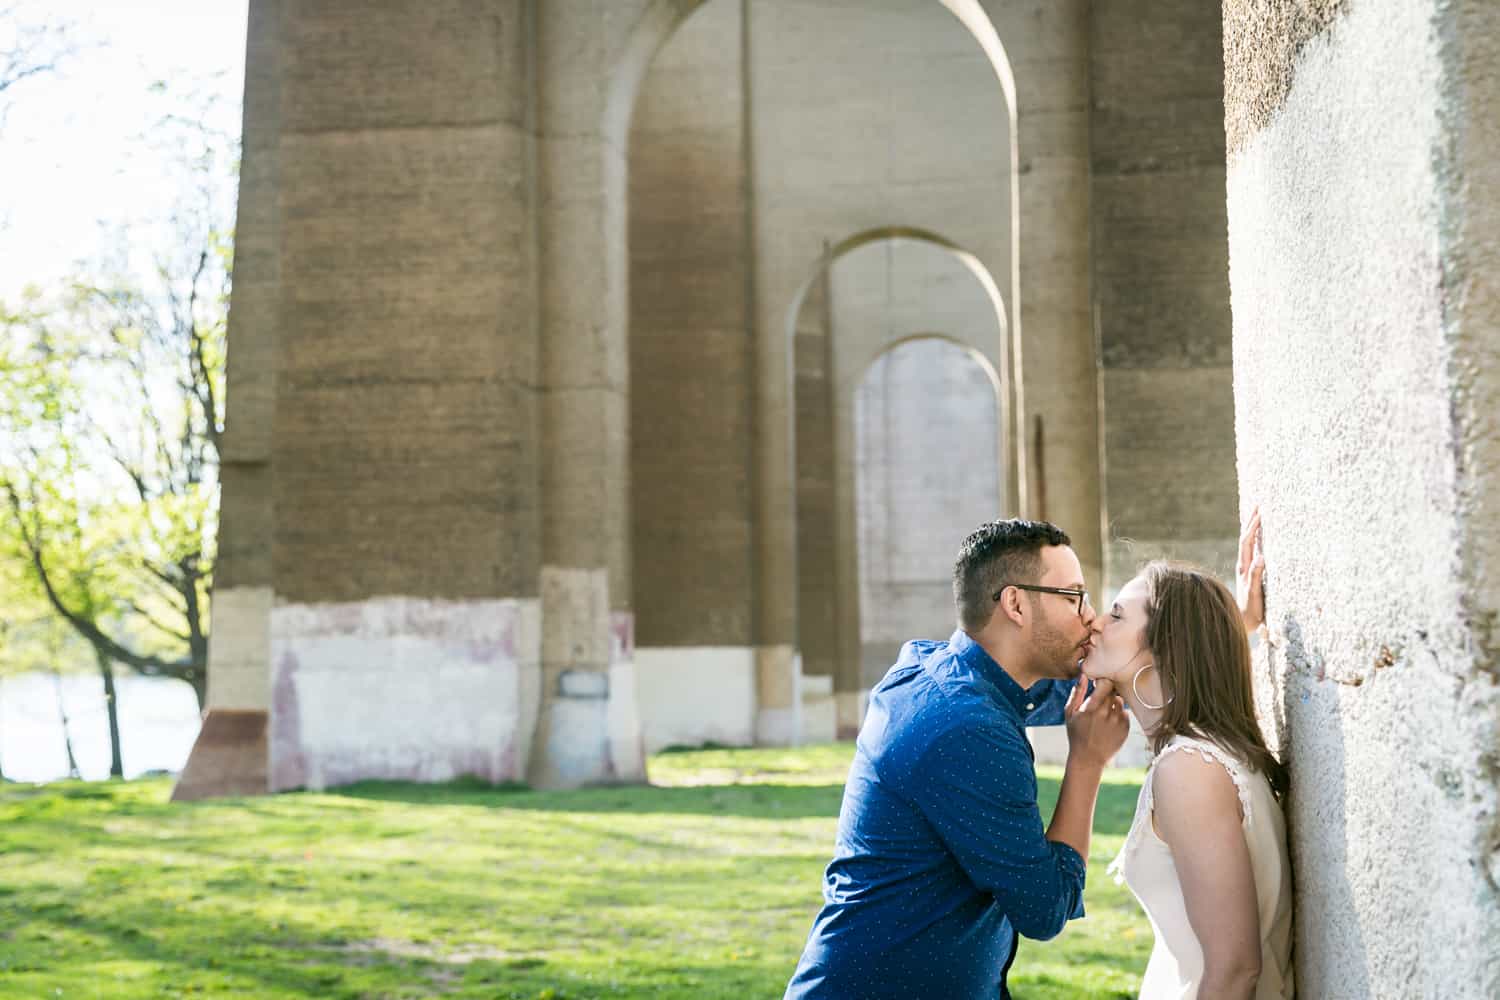 Couple kissing in front of stone arches during an Astoria Park engagement shoot